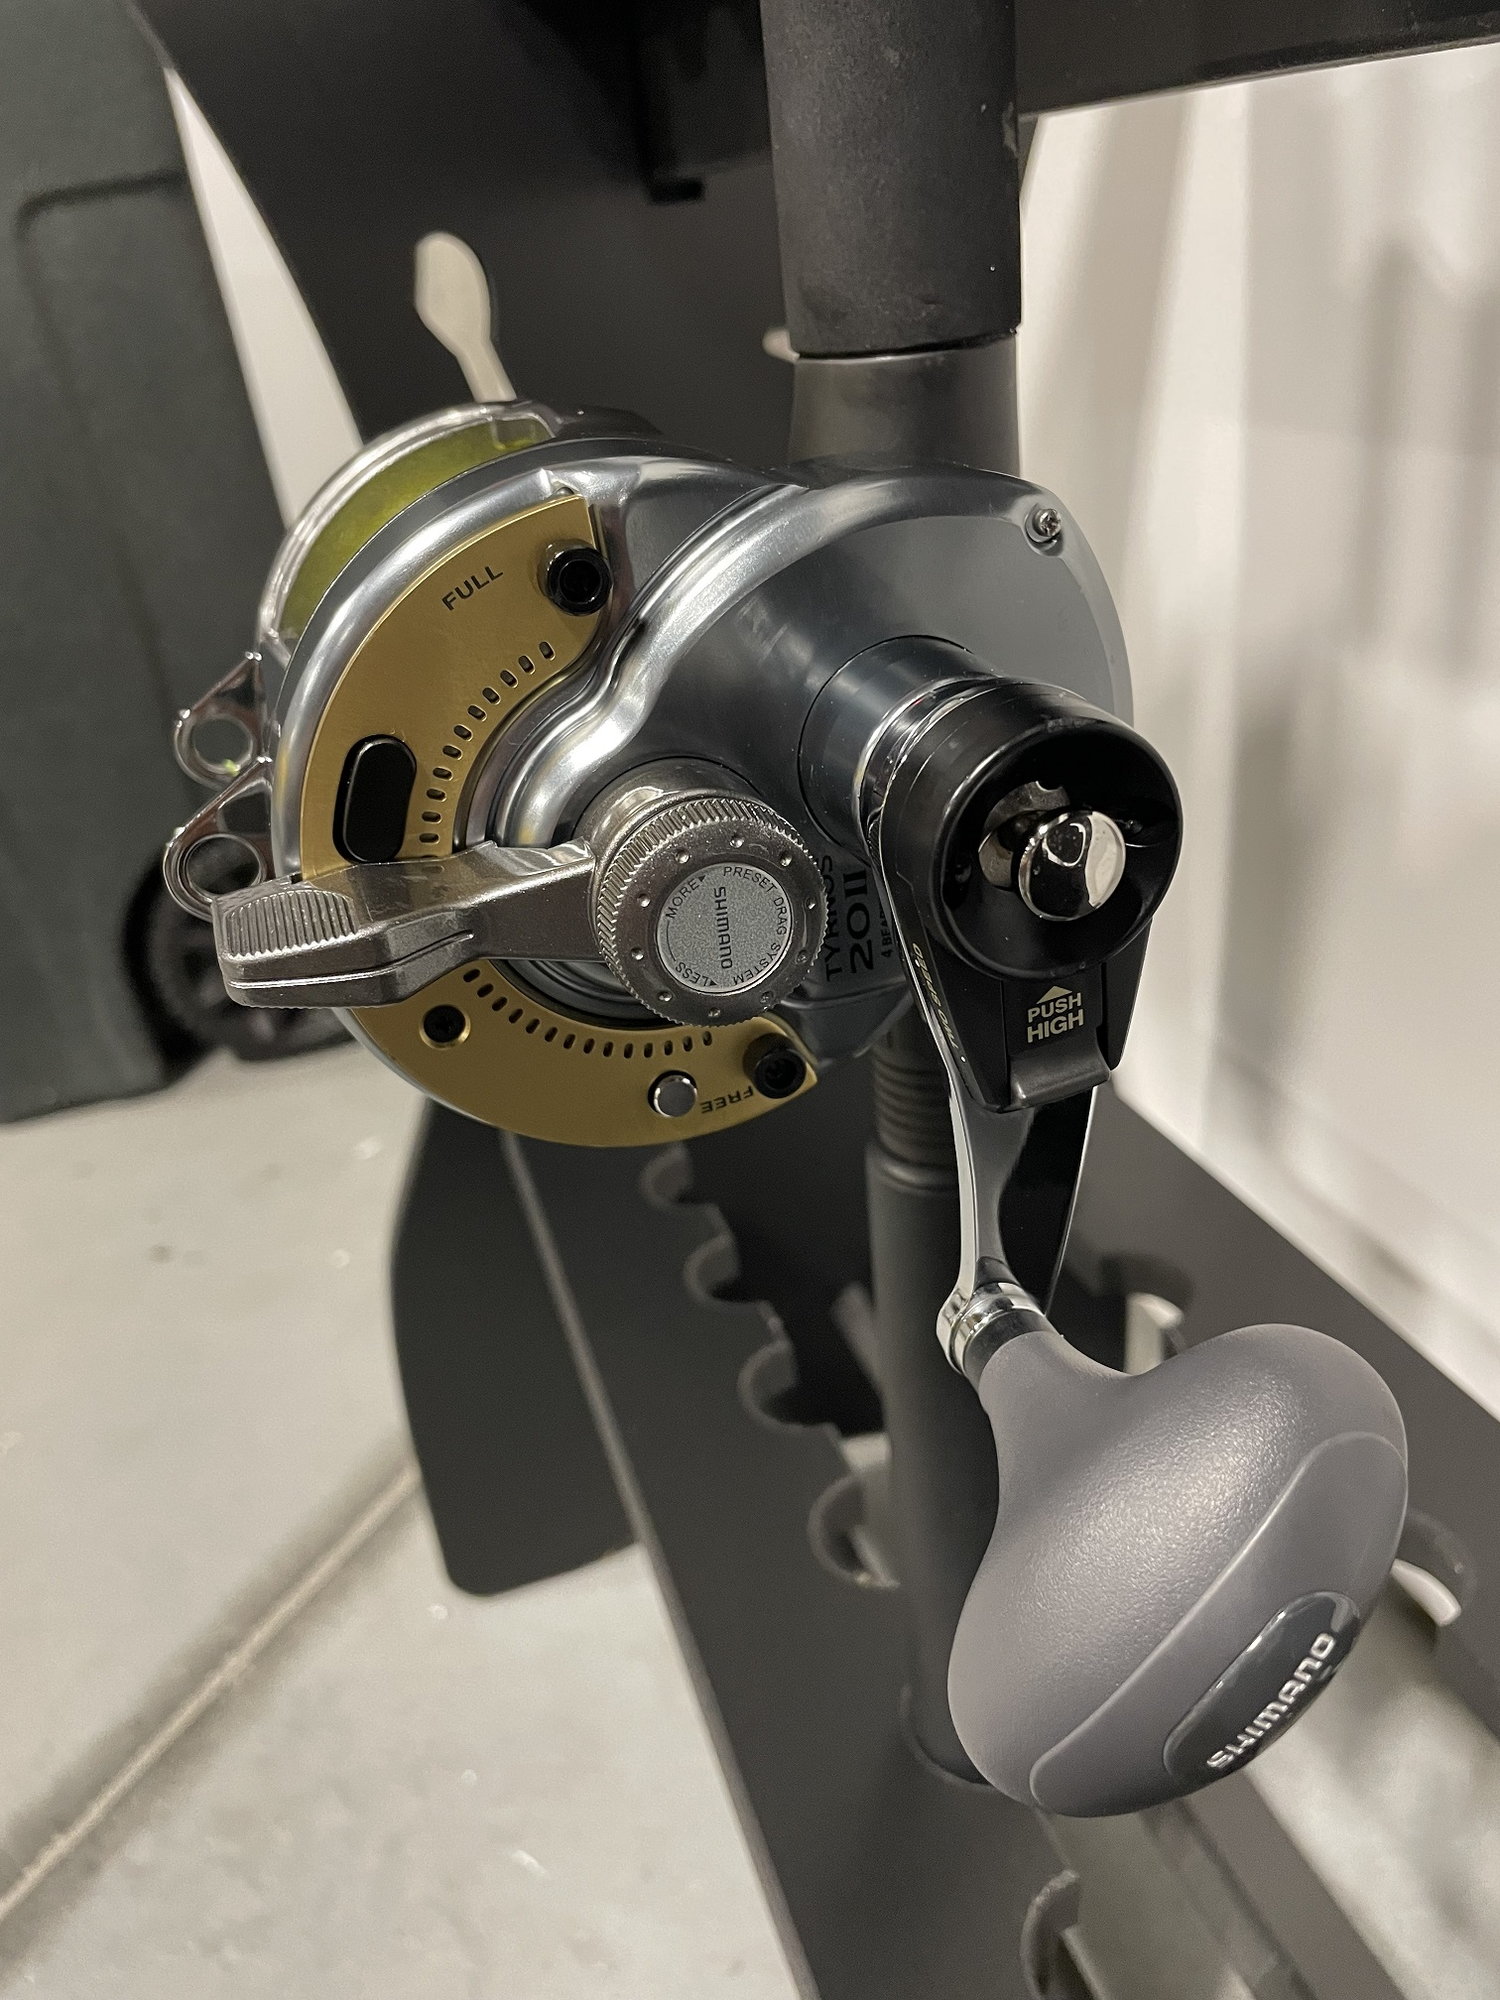 Very nice almost new rods & reels - The Hull Truth - Boating and Fishing  Forum